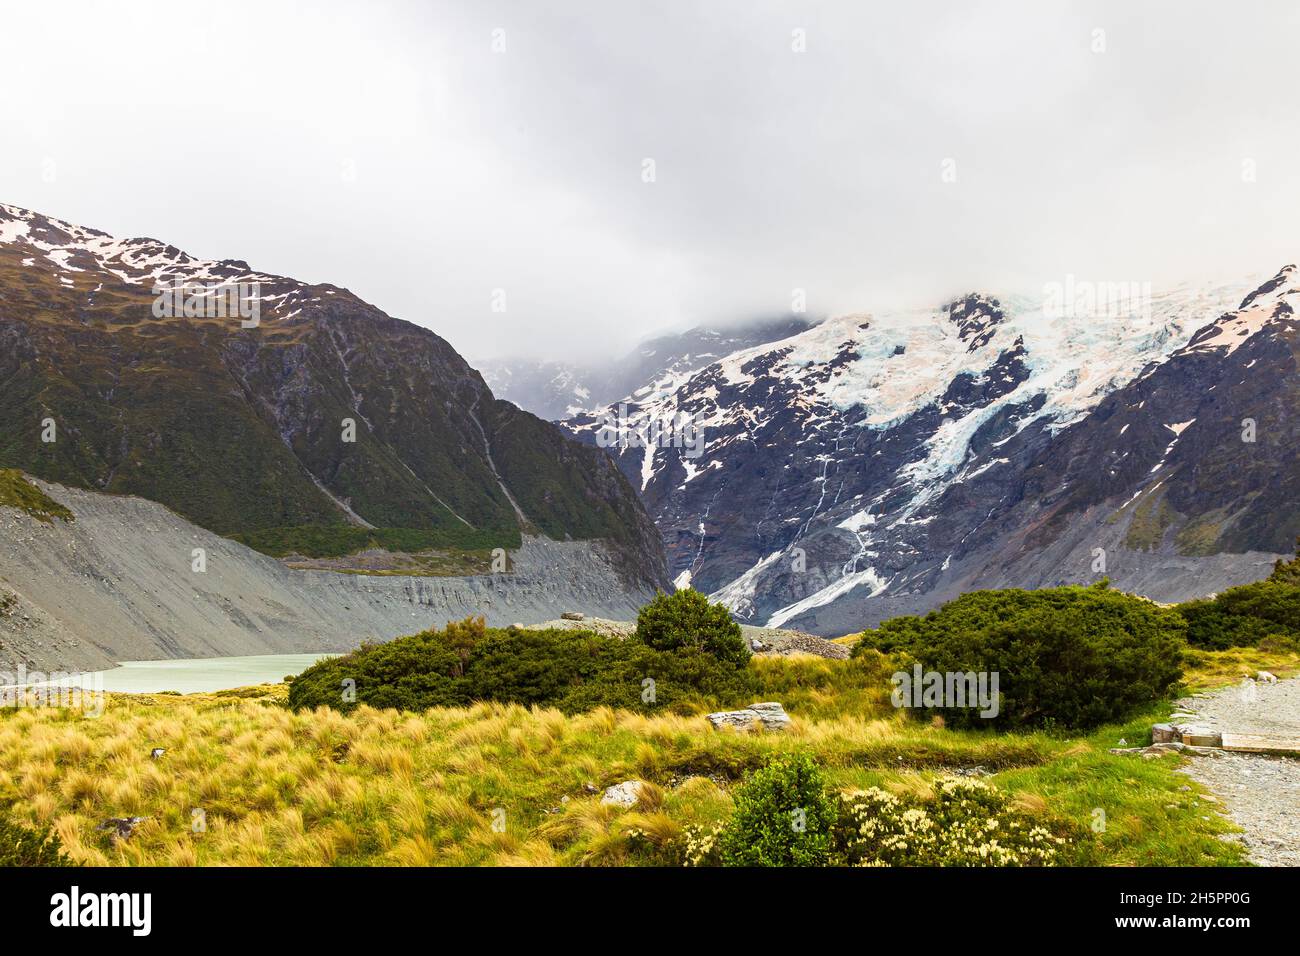 Landscapes in the Southern Alps. Lake surrounded by snow-capped mountains, New Zealand Stock Photo